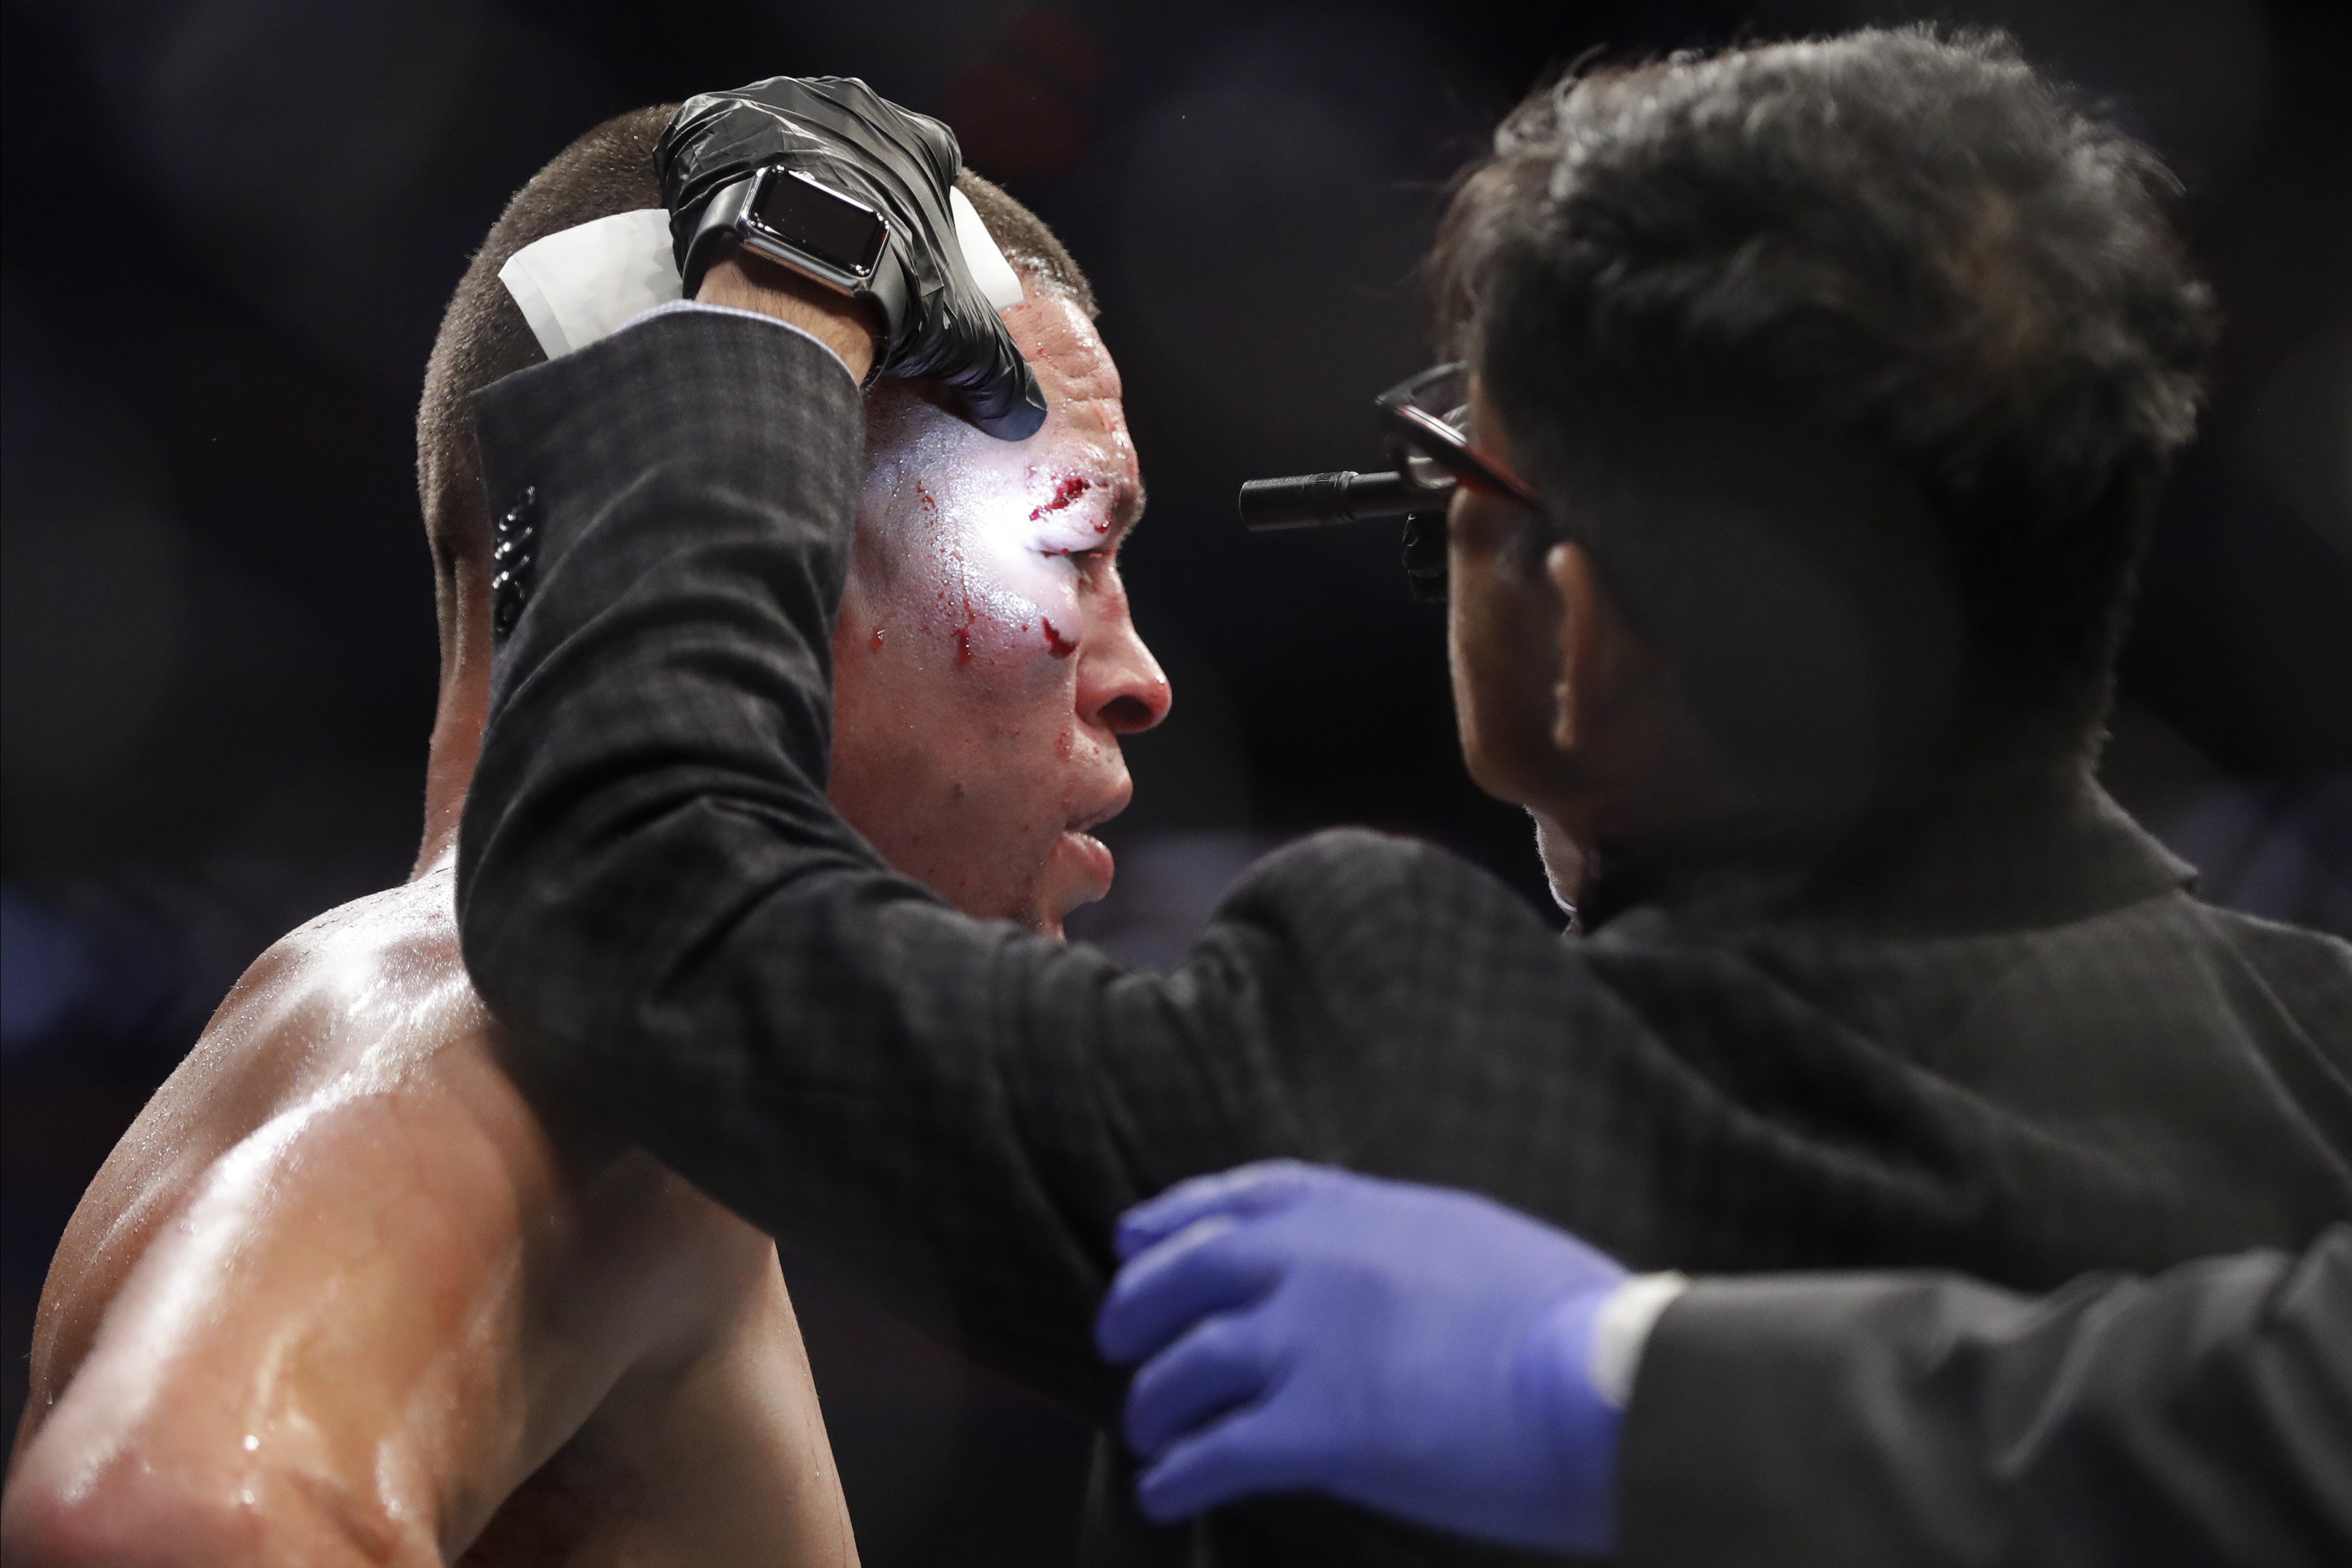 A doctor checks Nate Diaz before the fourth round against Jorge Masvidal at UFC 244. Photo: AP